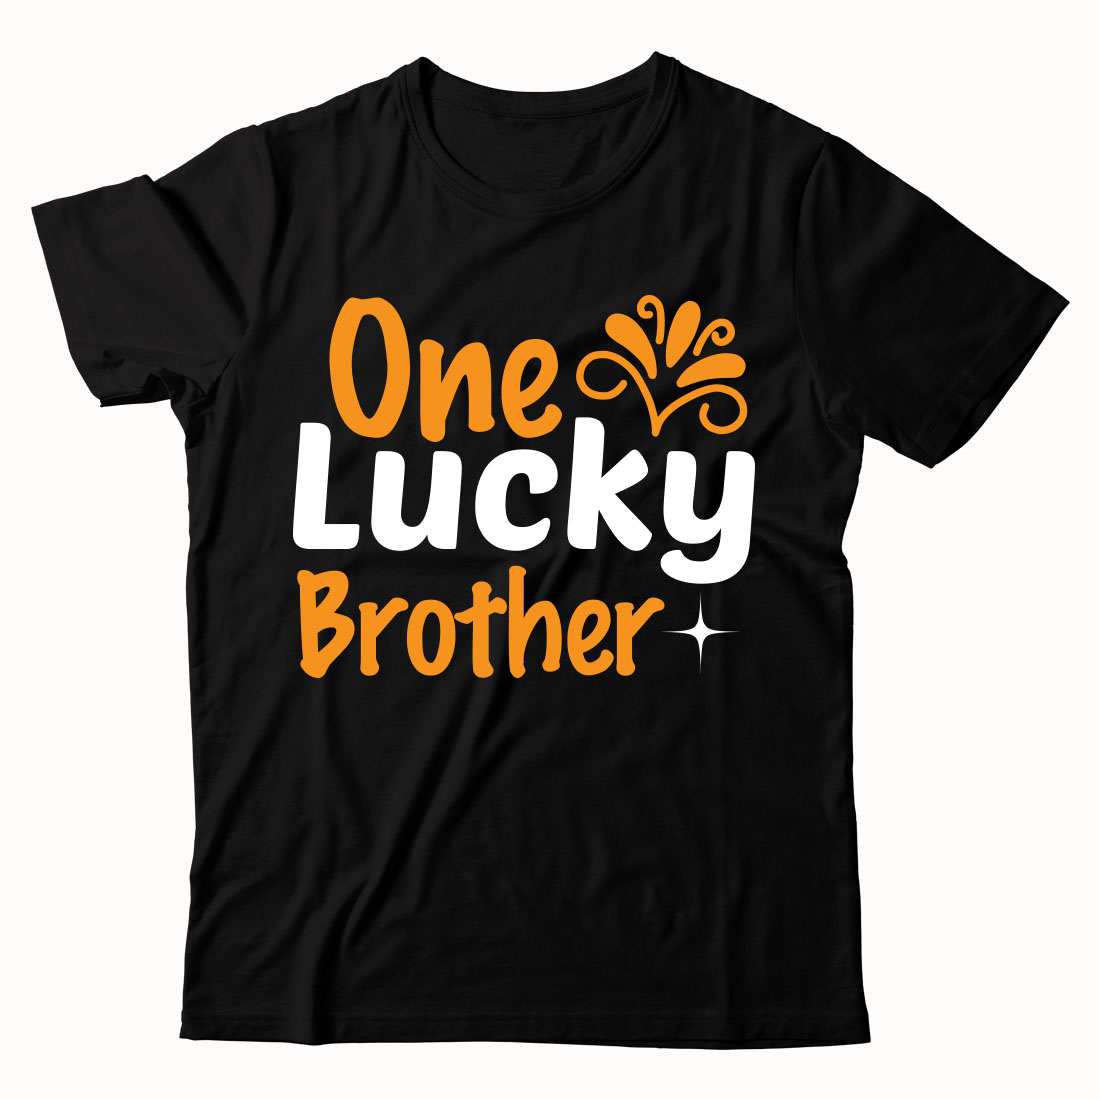 Black t - shirt that says one lucky brother.